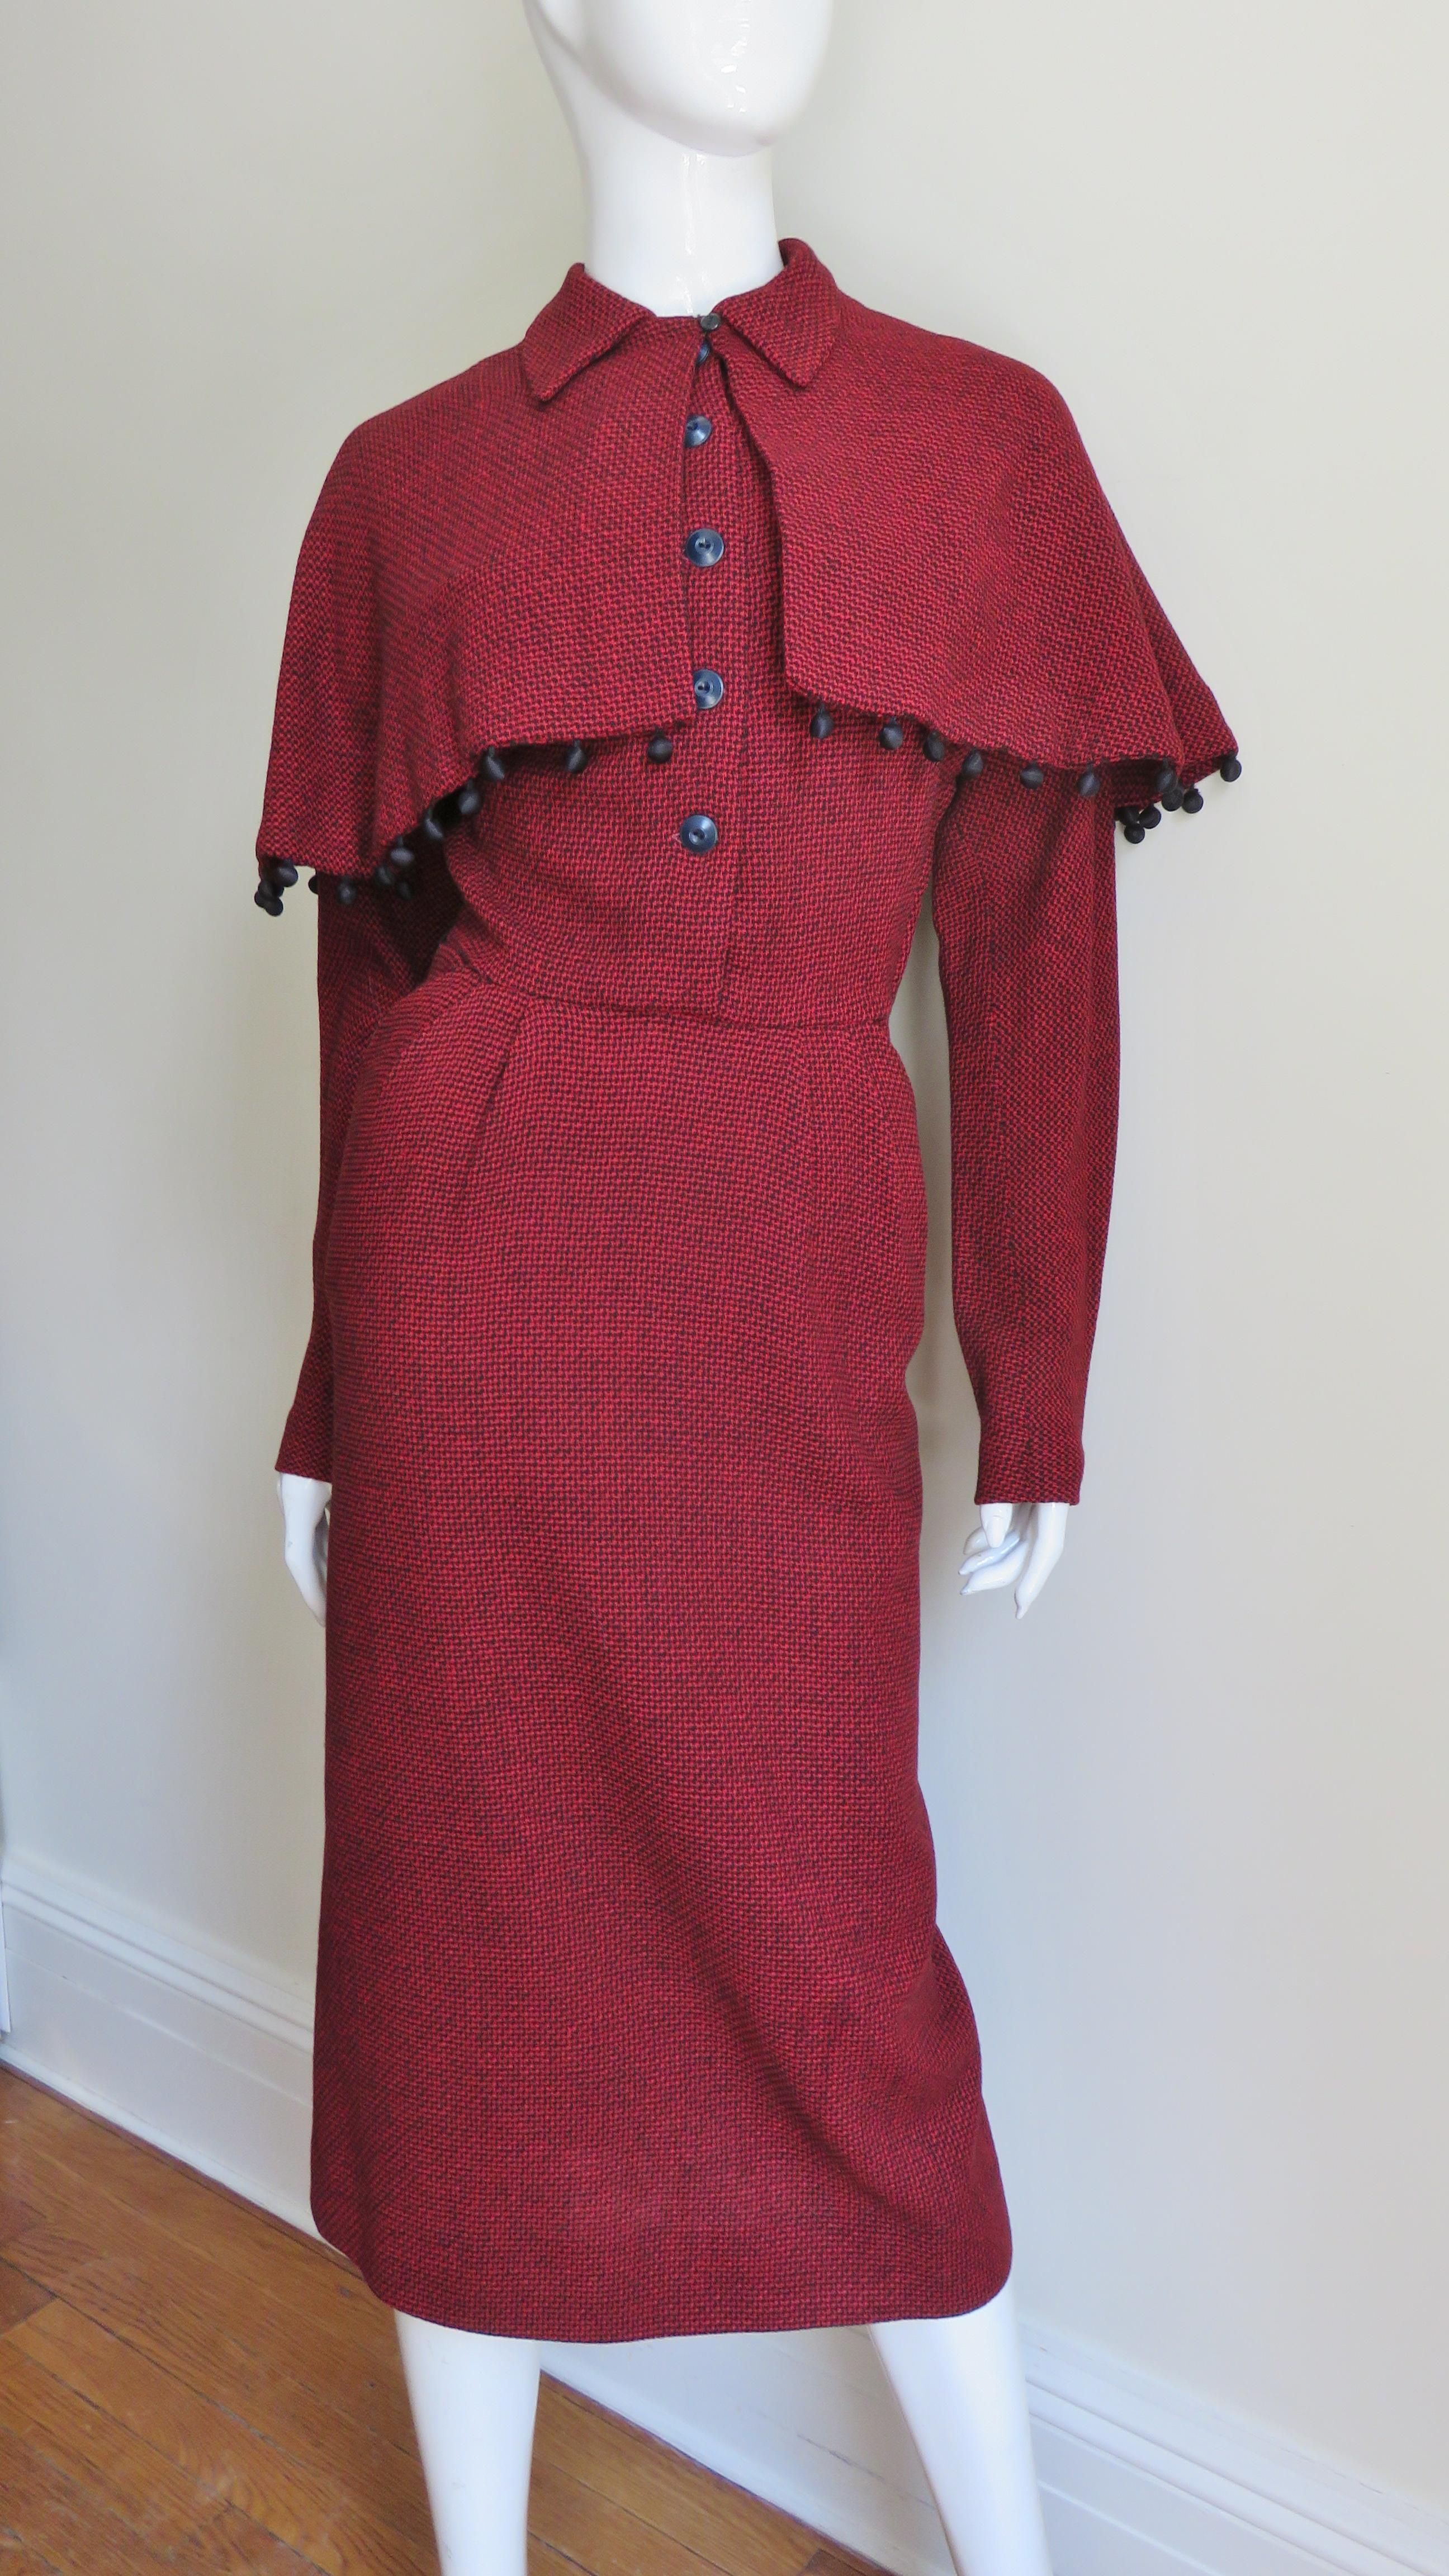 A fabulous black and red wool small hounds tooth pattern dress with a detachable cape.  It has a peter pan collar, button closure to the waist and raglan cut sleeves.  The skirt portion has 2 tucks on either side of the center front waist, 2